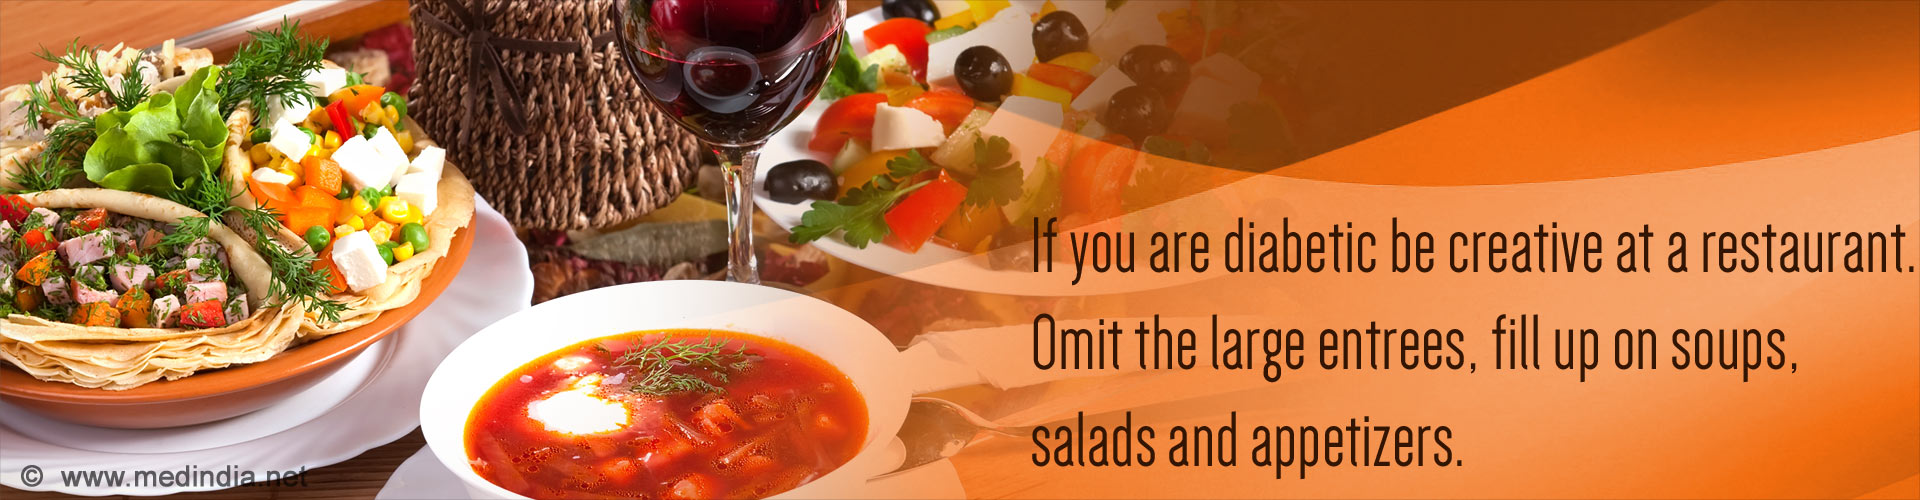 If you are diabetic be creative at a restaurant. Omit the large entrees, fill up on soups, salads and appetizers.